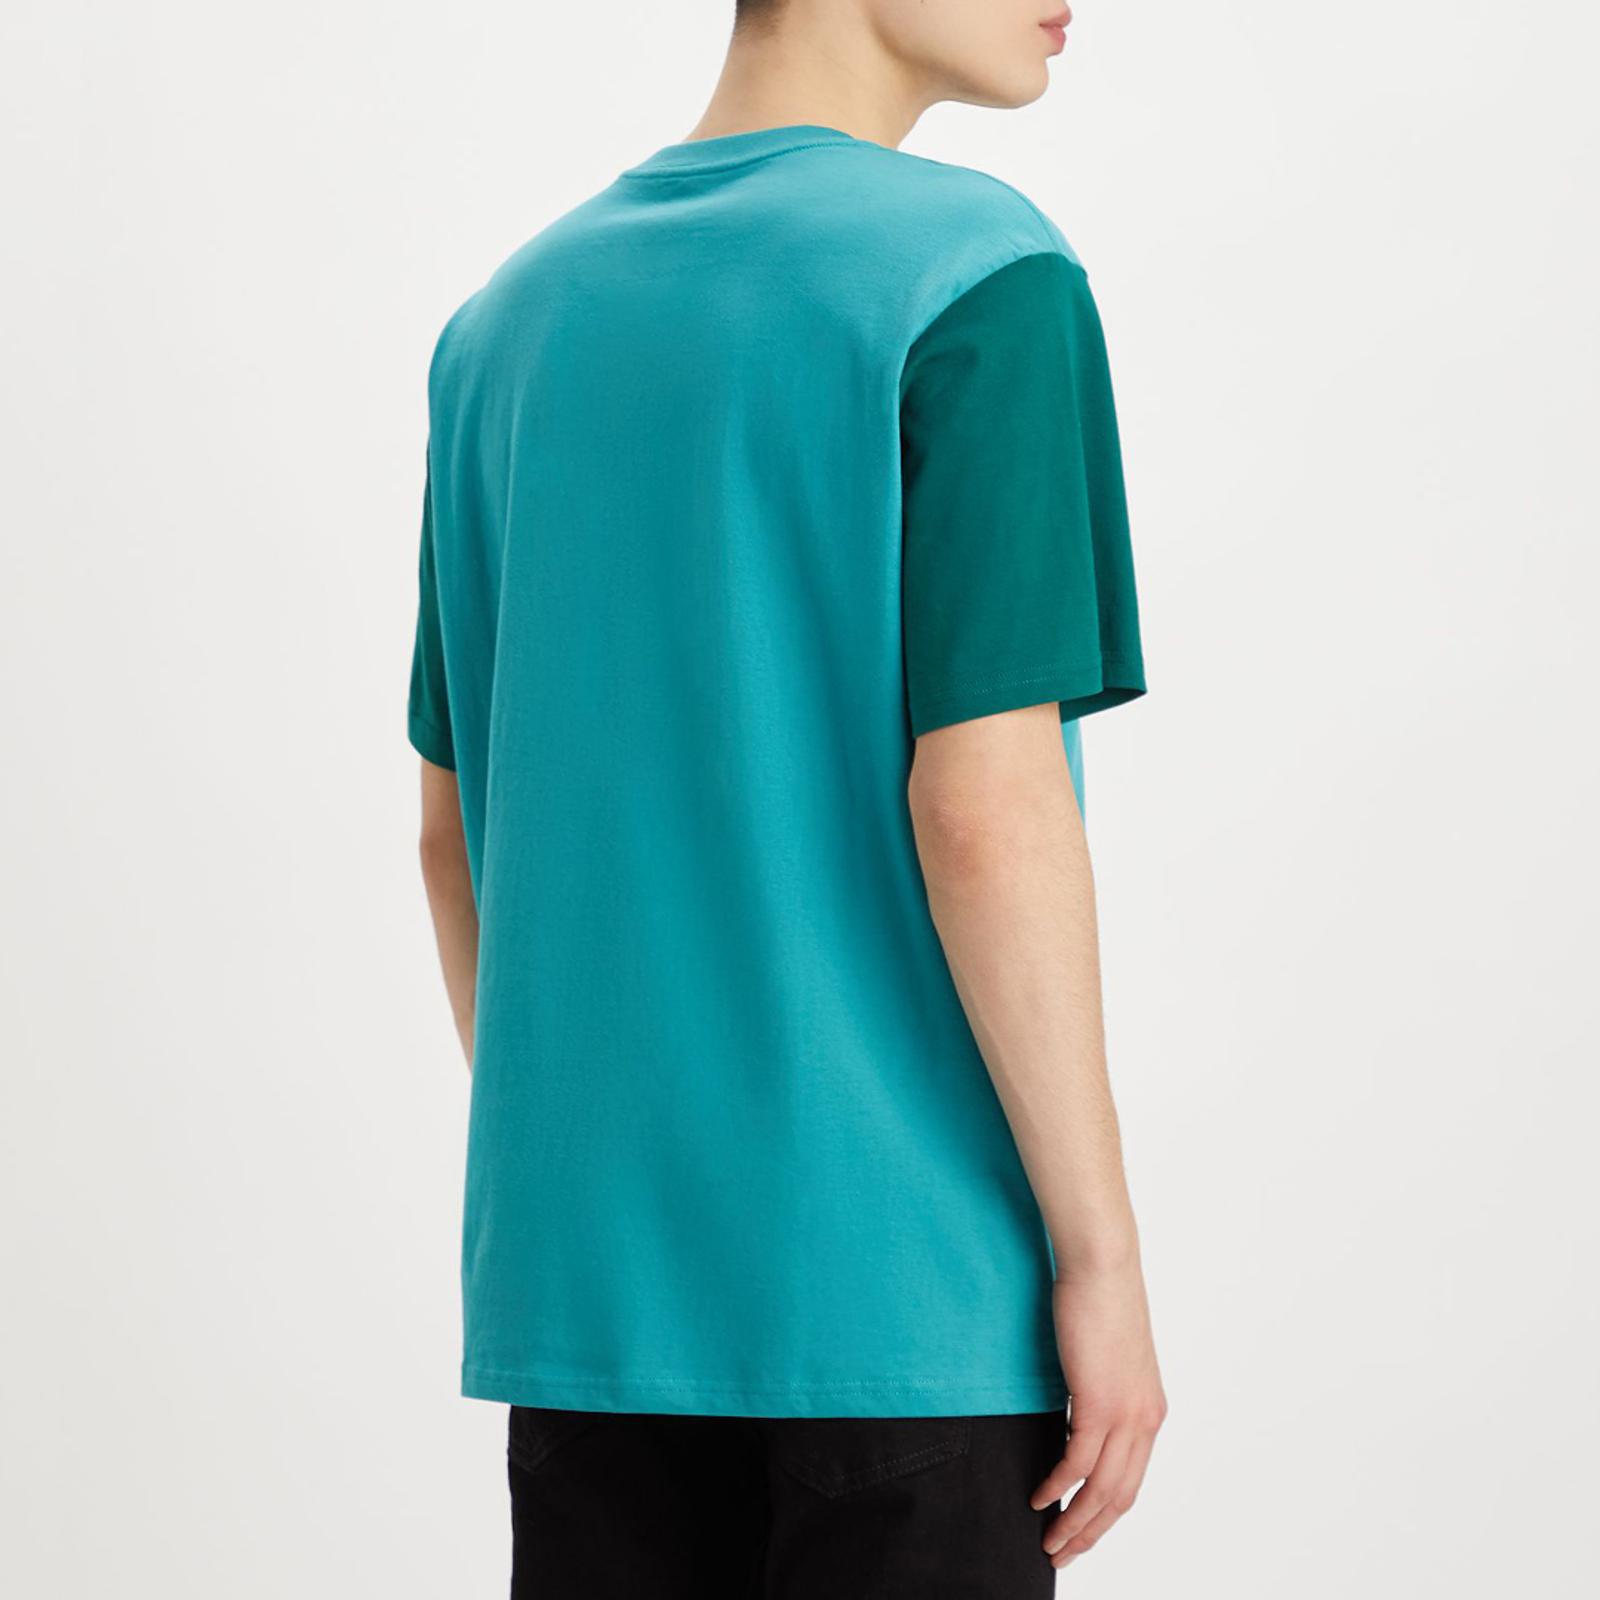 Teal Contrast Sleeve Cotton T-Shirt - BrandAlley